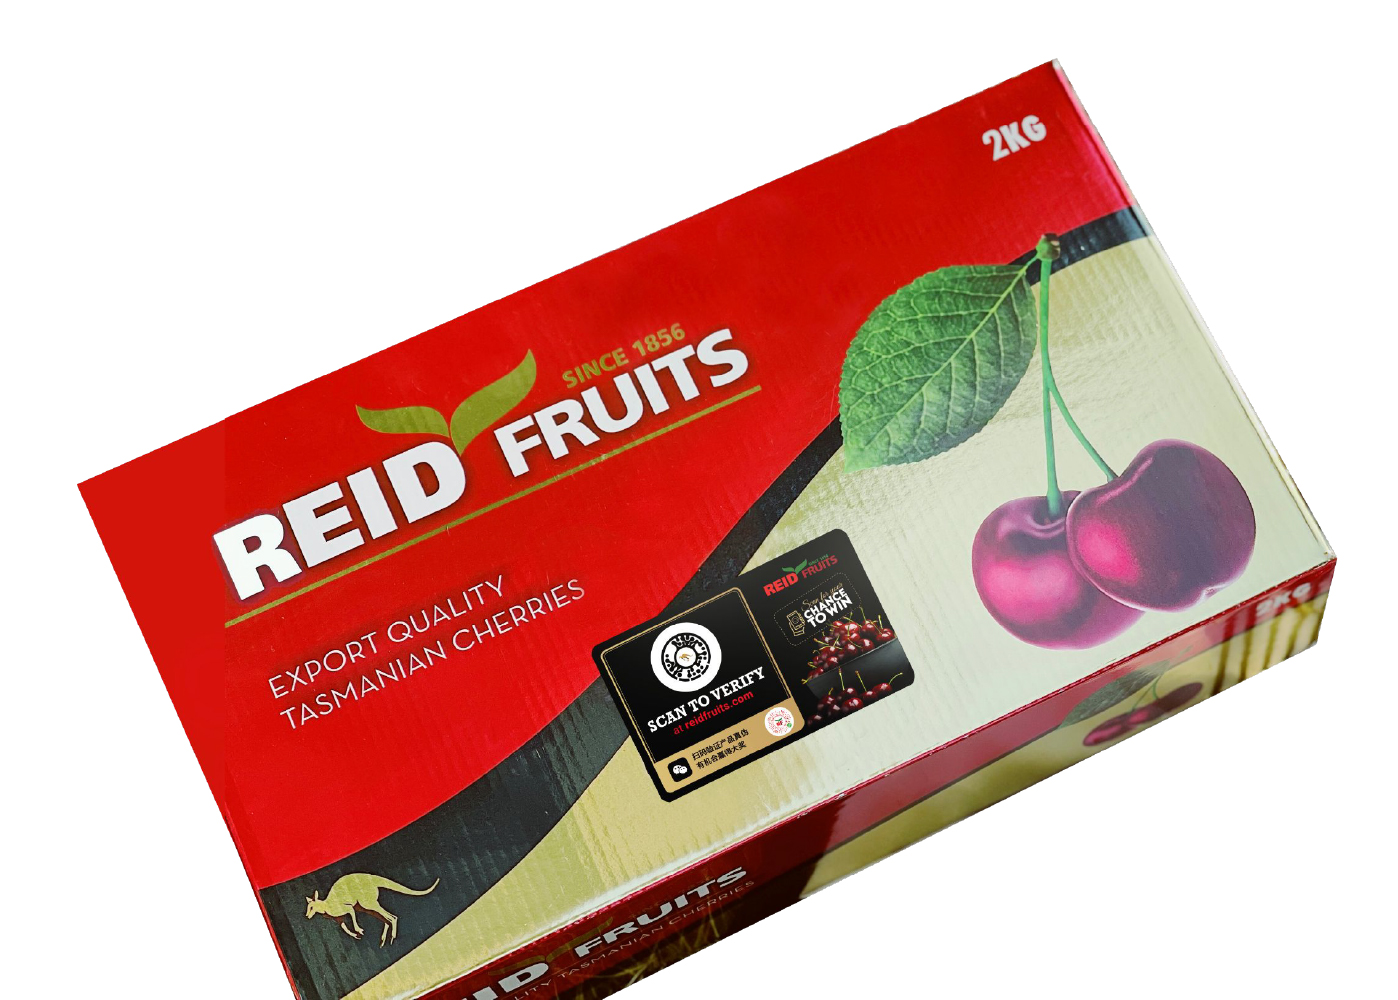 Reid Fruits Experiences a Dramatic Decline in Product Counterfeiting Due to Digital Fingerprint Solution